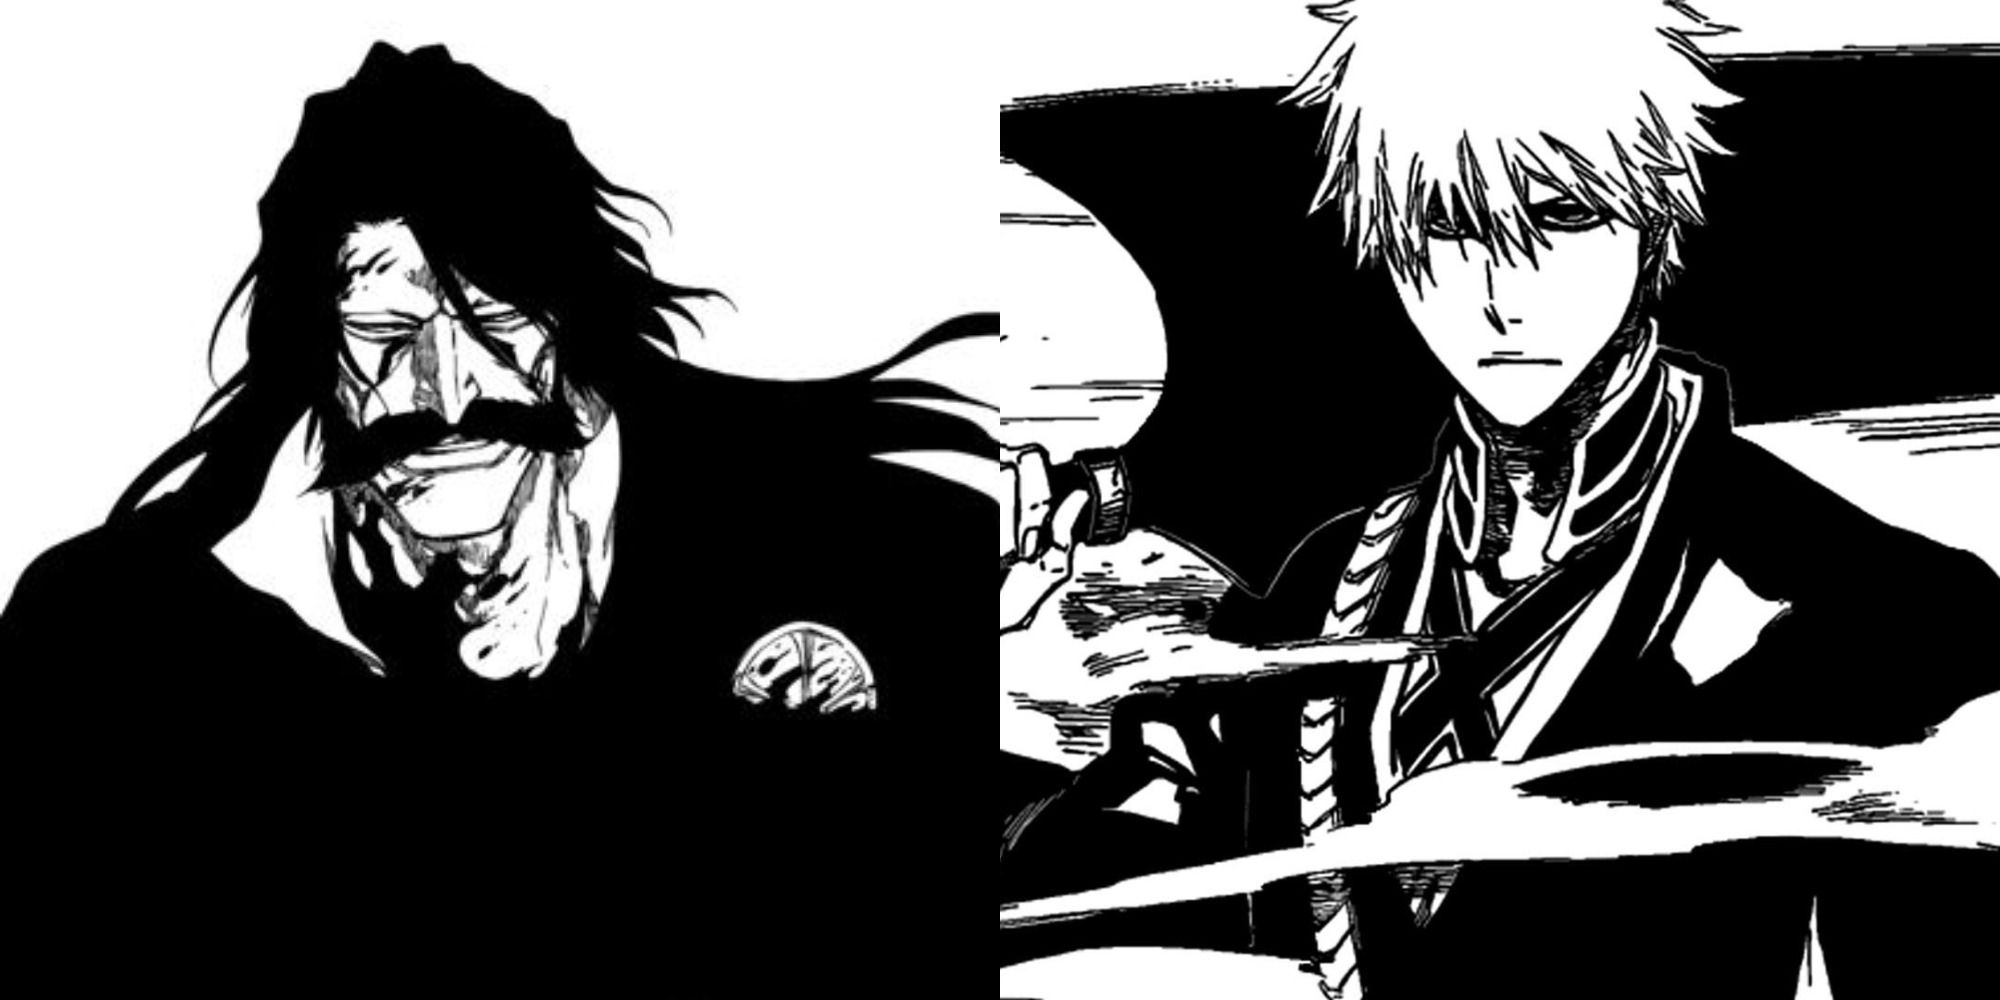 LADIES AND GENTS, I am about to conclude my read through of the bleach  manga I that of the form of the thousand year blood war arc. Fullbring arc  was amazing to